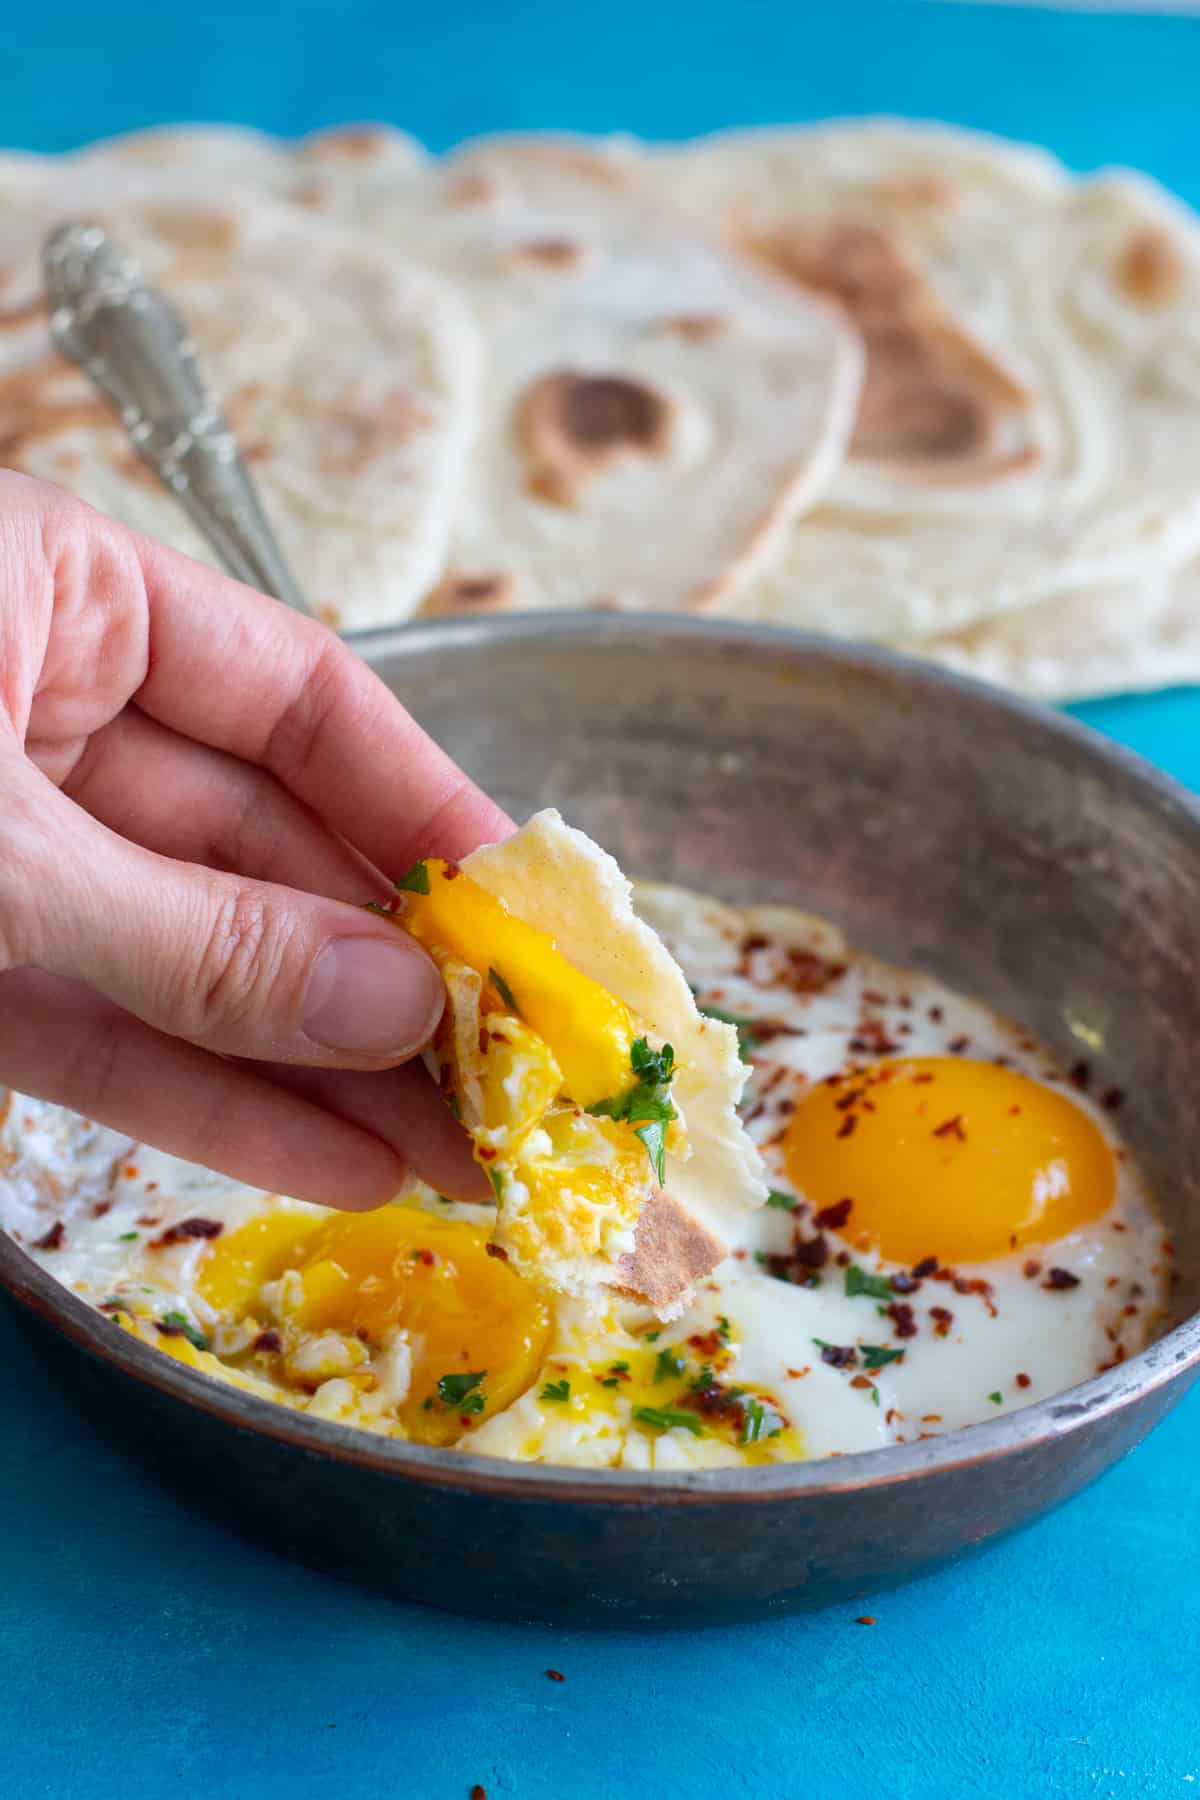 Serve lavash with some eggs or breakfast.